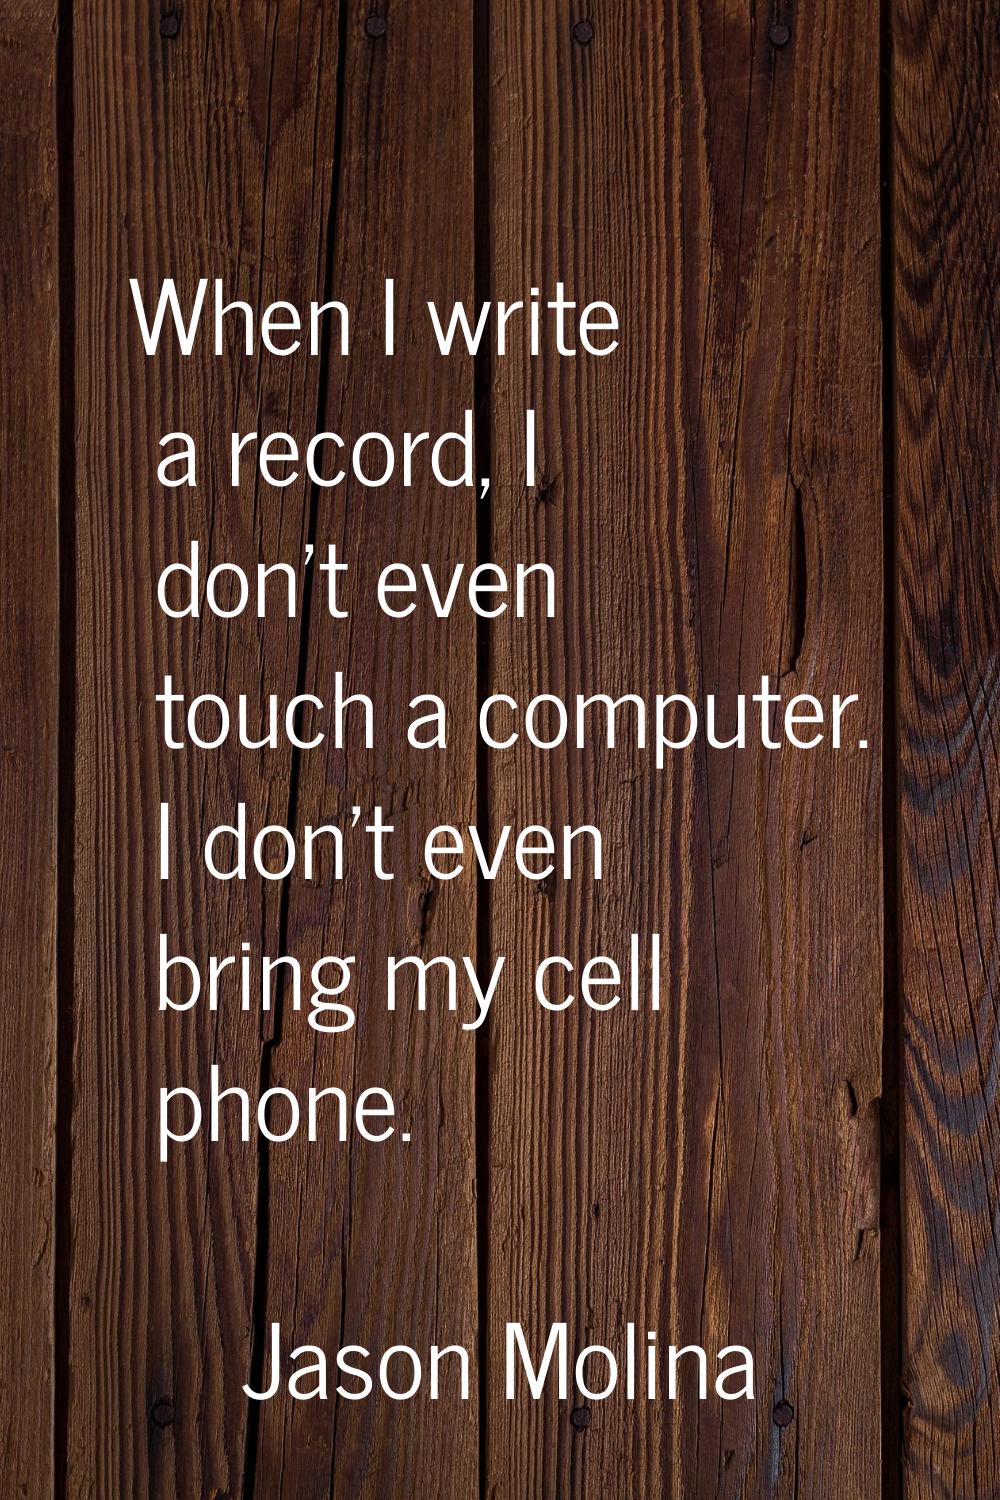 When I write a record, I don't even touch a computer. I don't even bring my cell phone.